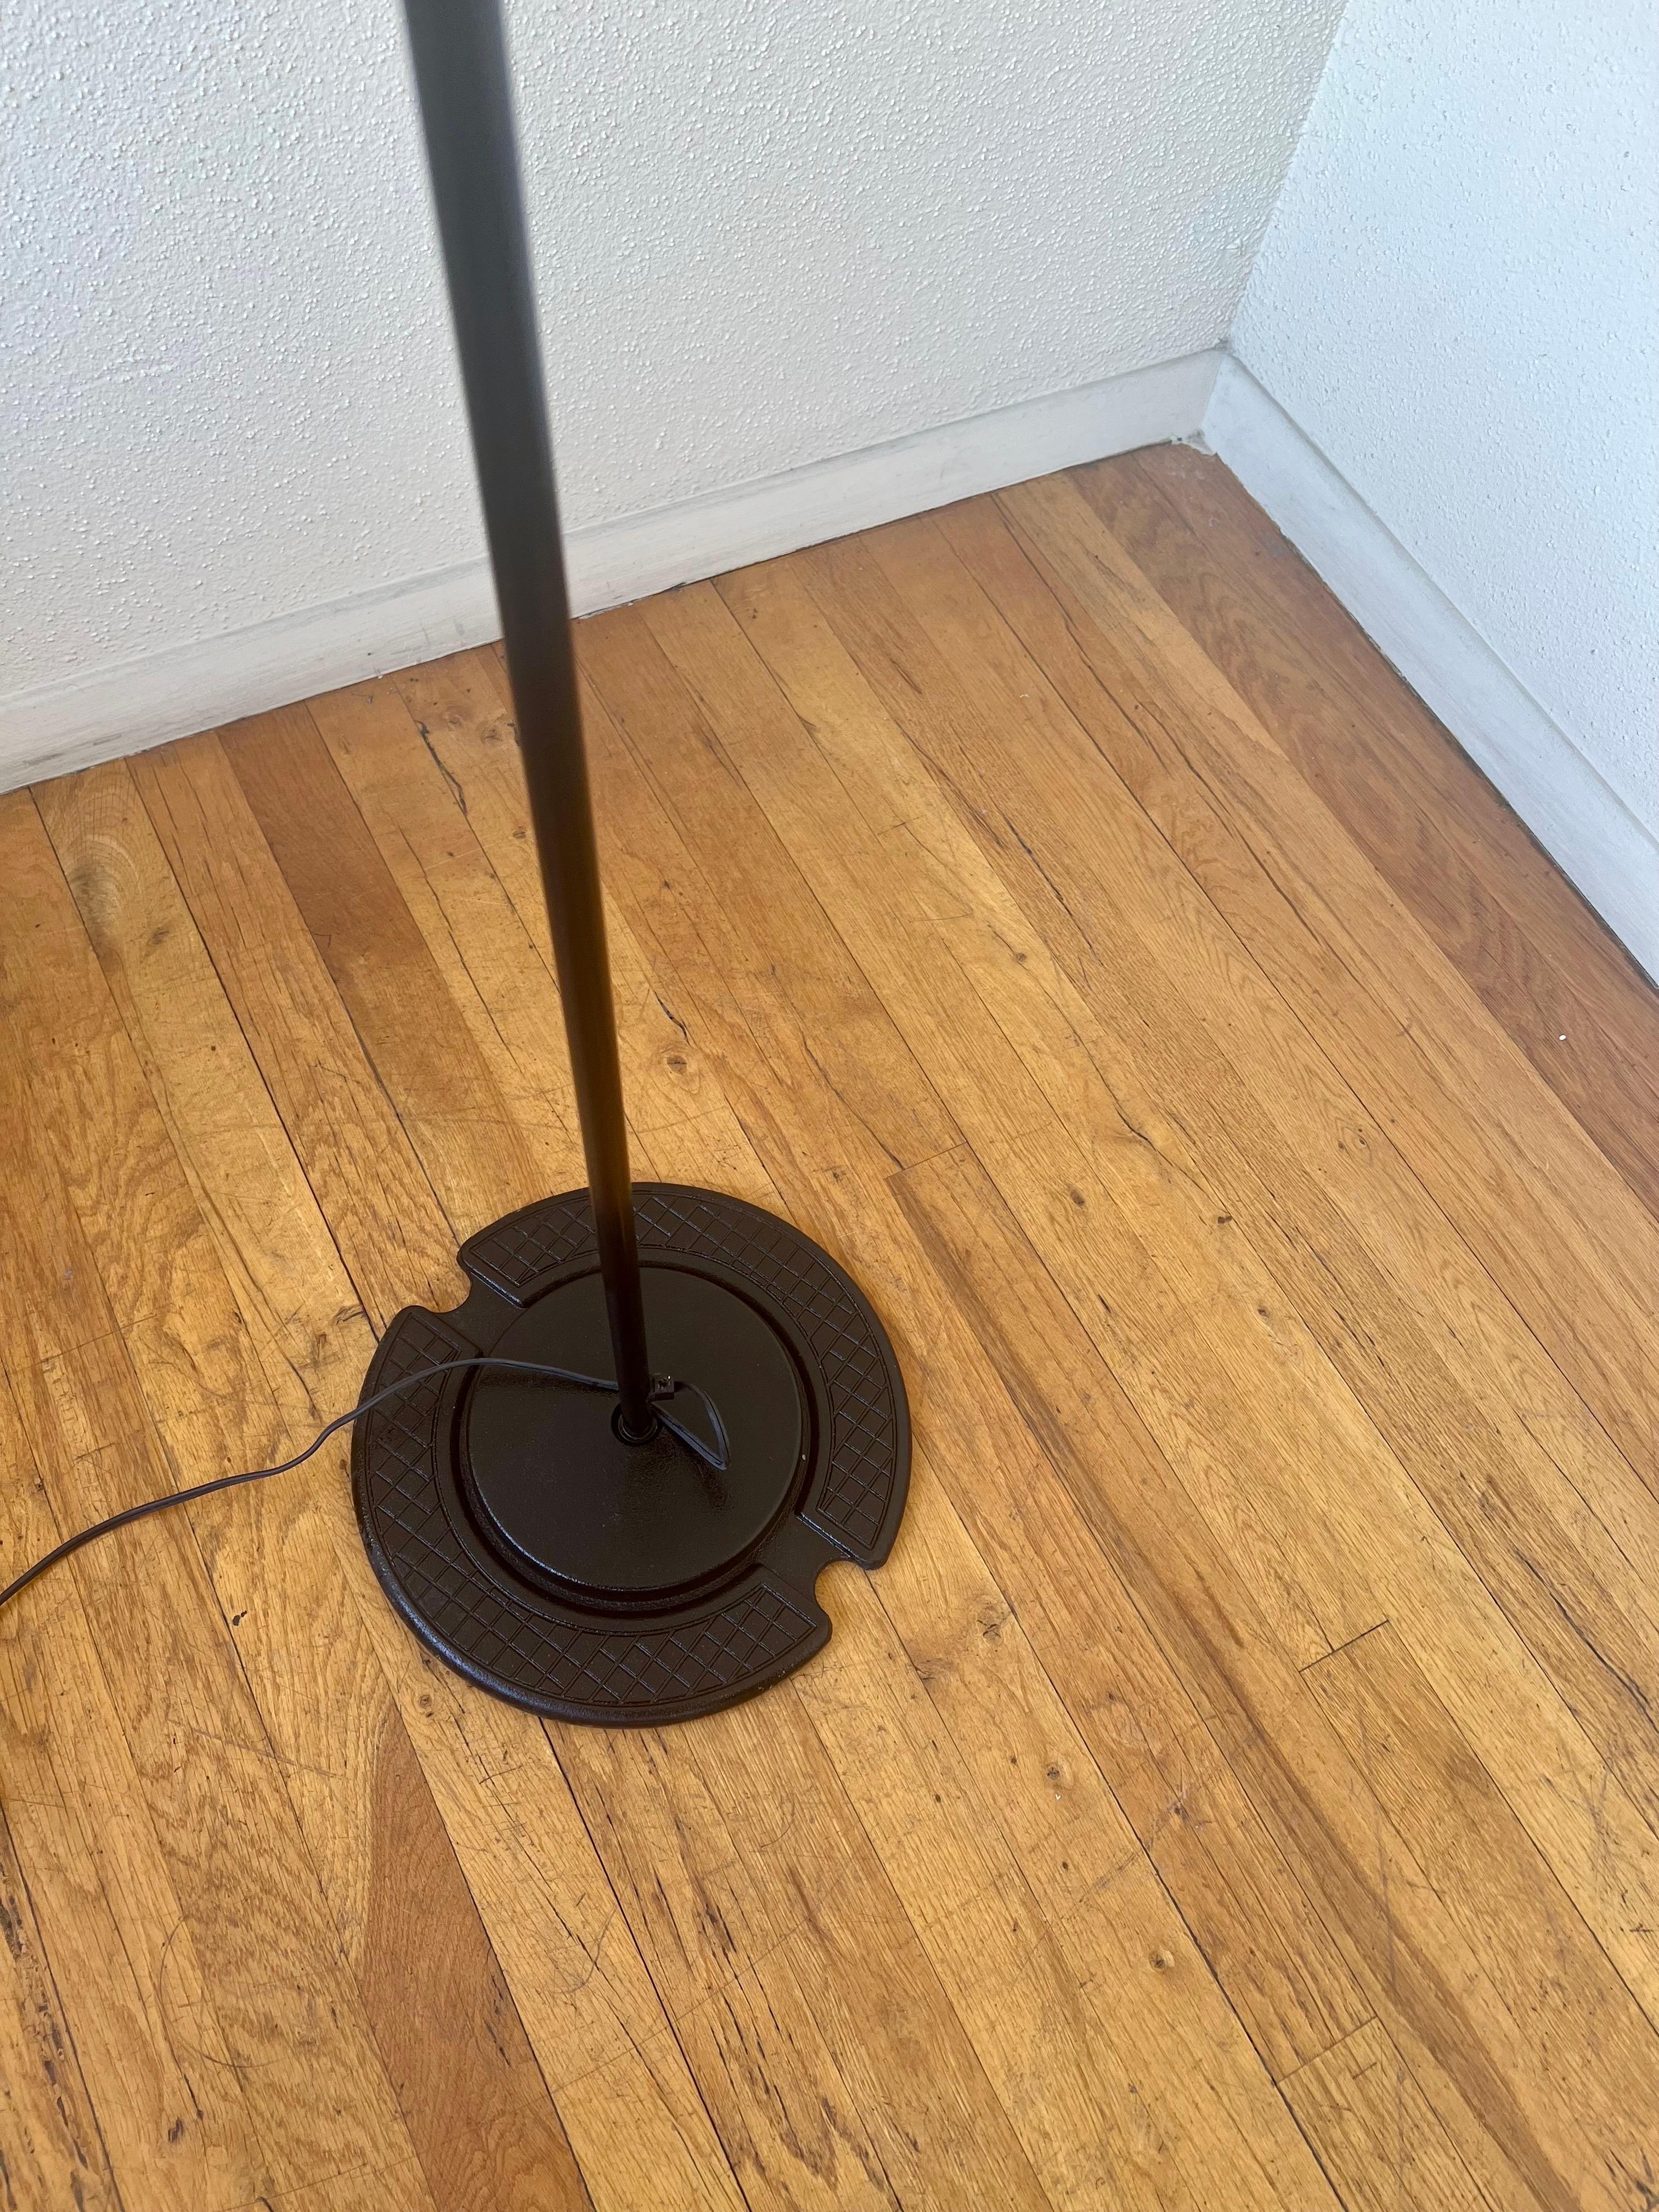 Rare Multidirectional Floor Clip Lamp by Hannes Wettstein for Belux In Excellent Condition For Sale In San Diego, CA